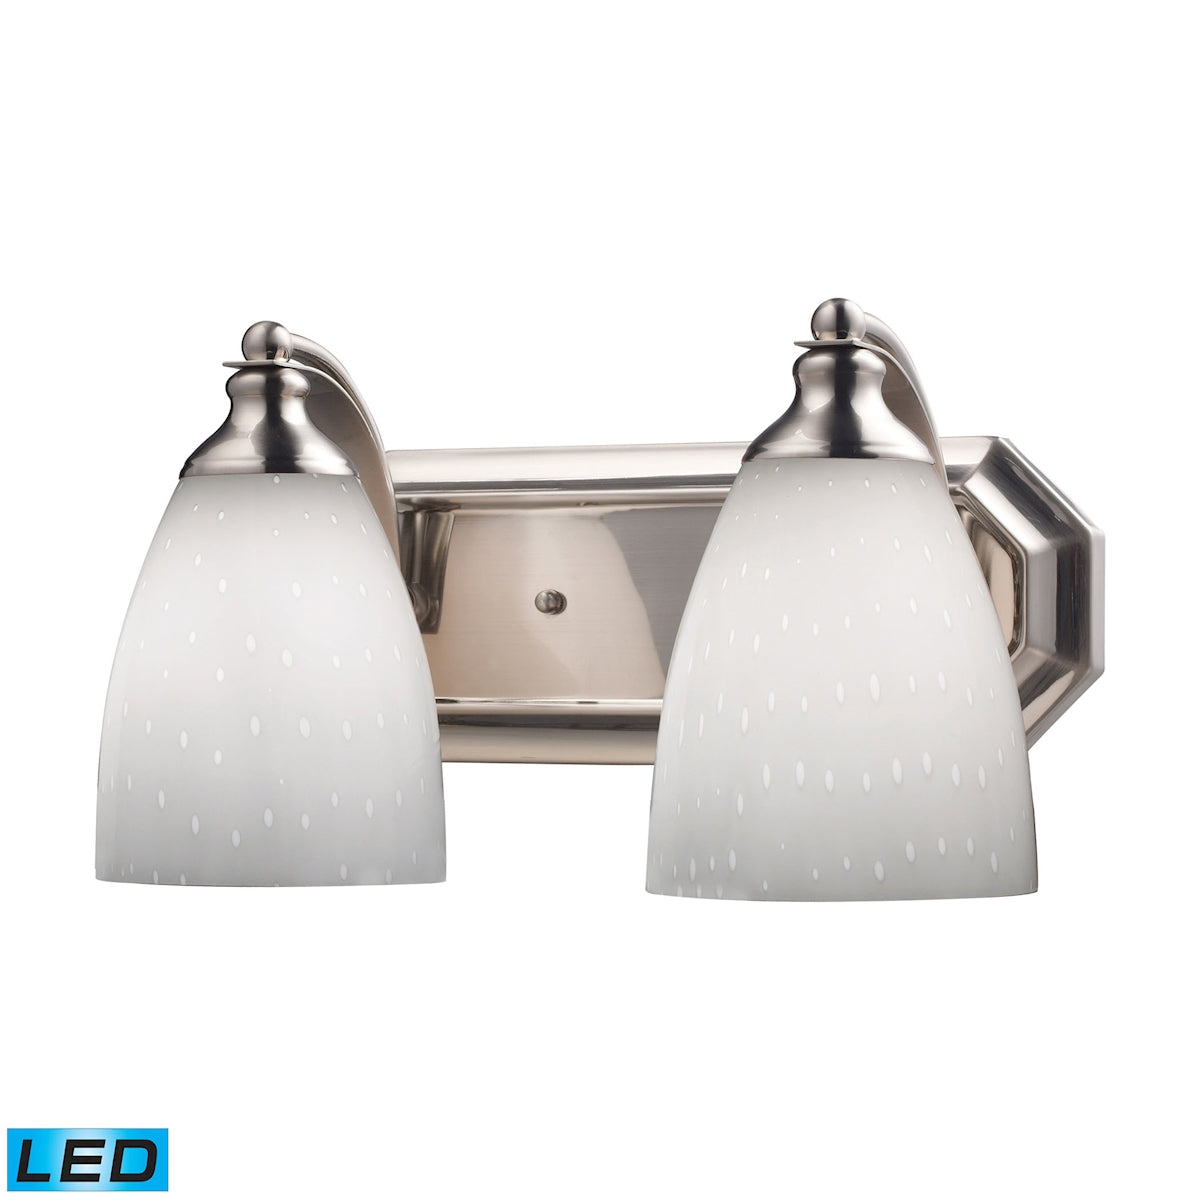 Mix-N-Match Vanity 2-Light Wall Lamp in Satin Nickel with Simple White Glass - Includes LED Bulbs